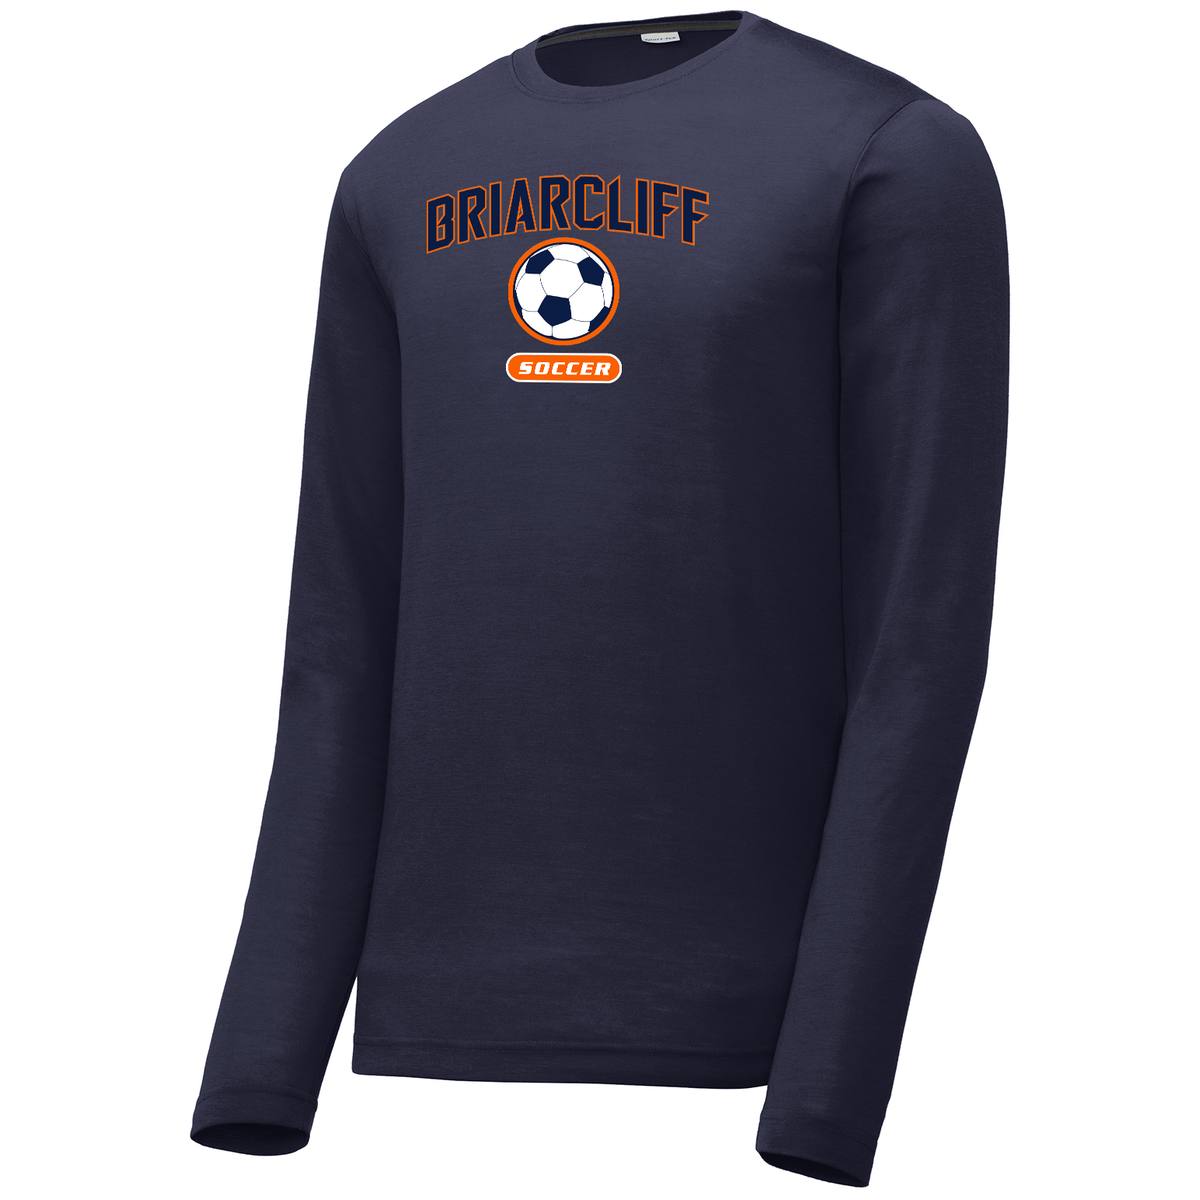 Briarcliff Soccer Long Sleeve CottonTouch Performance Shirt